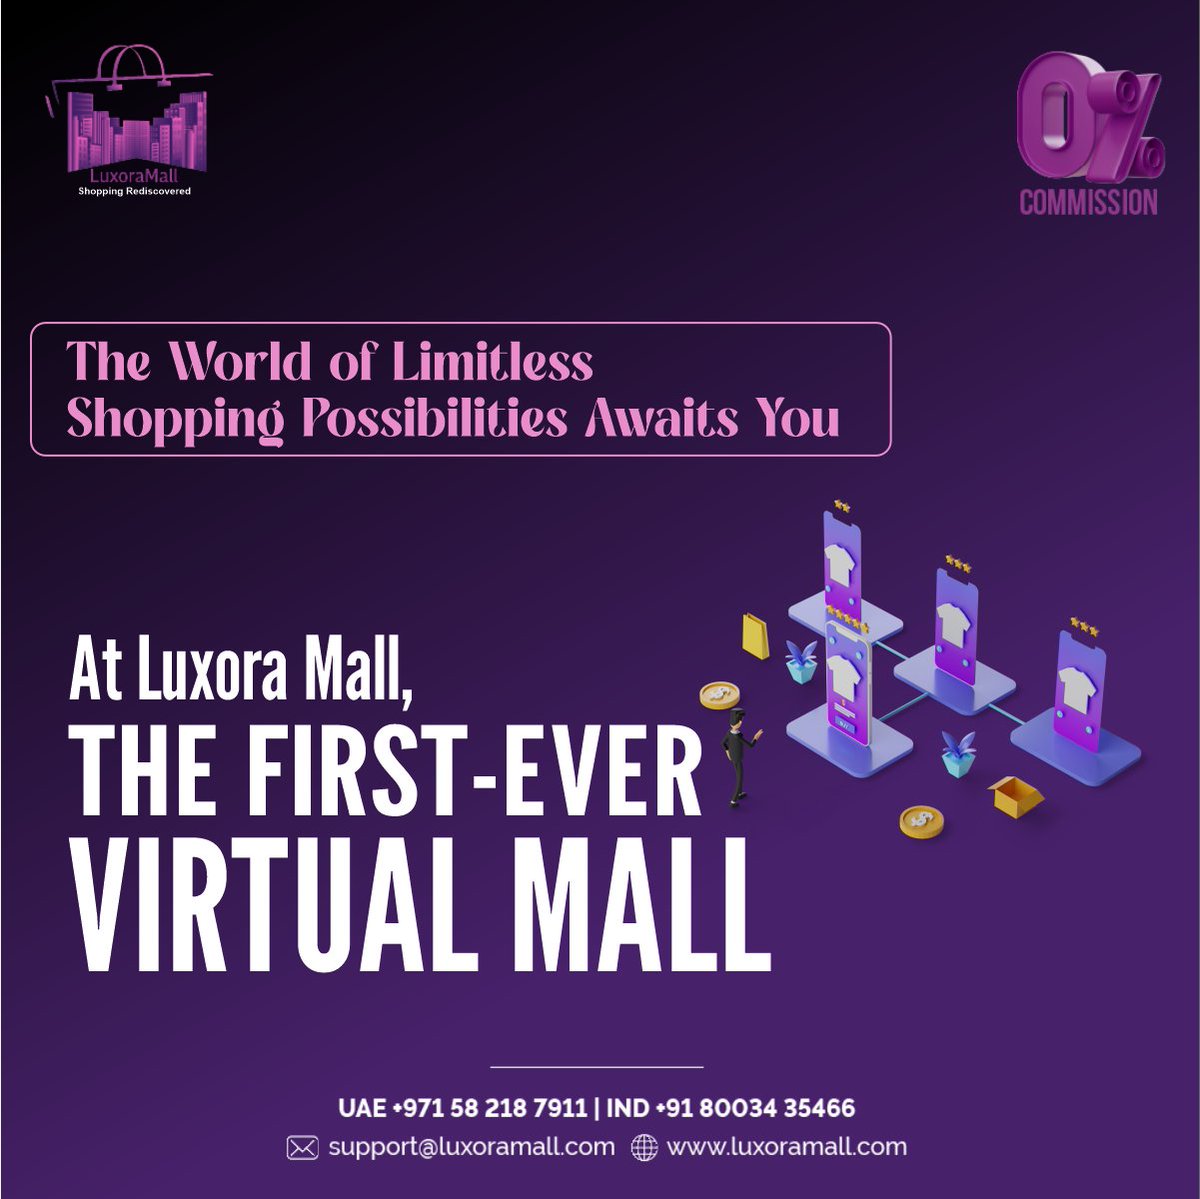 A real shopping experience from your home, office or anywhere in the world and access to fashion across the globe. The real best of both worlds.
.
.
.
.
#luxoramall #virtualreality #onlineluxuryshopping 
#mensshopping #virtualexperience #realityvirtual #metaversegeneration #viral